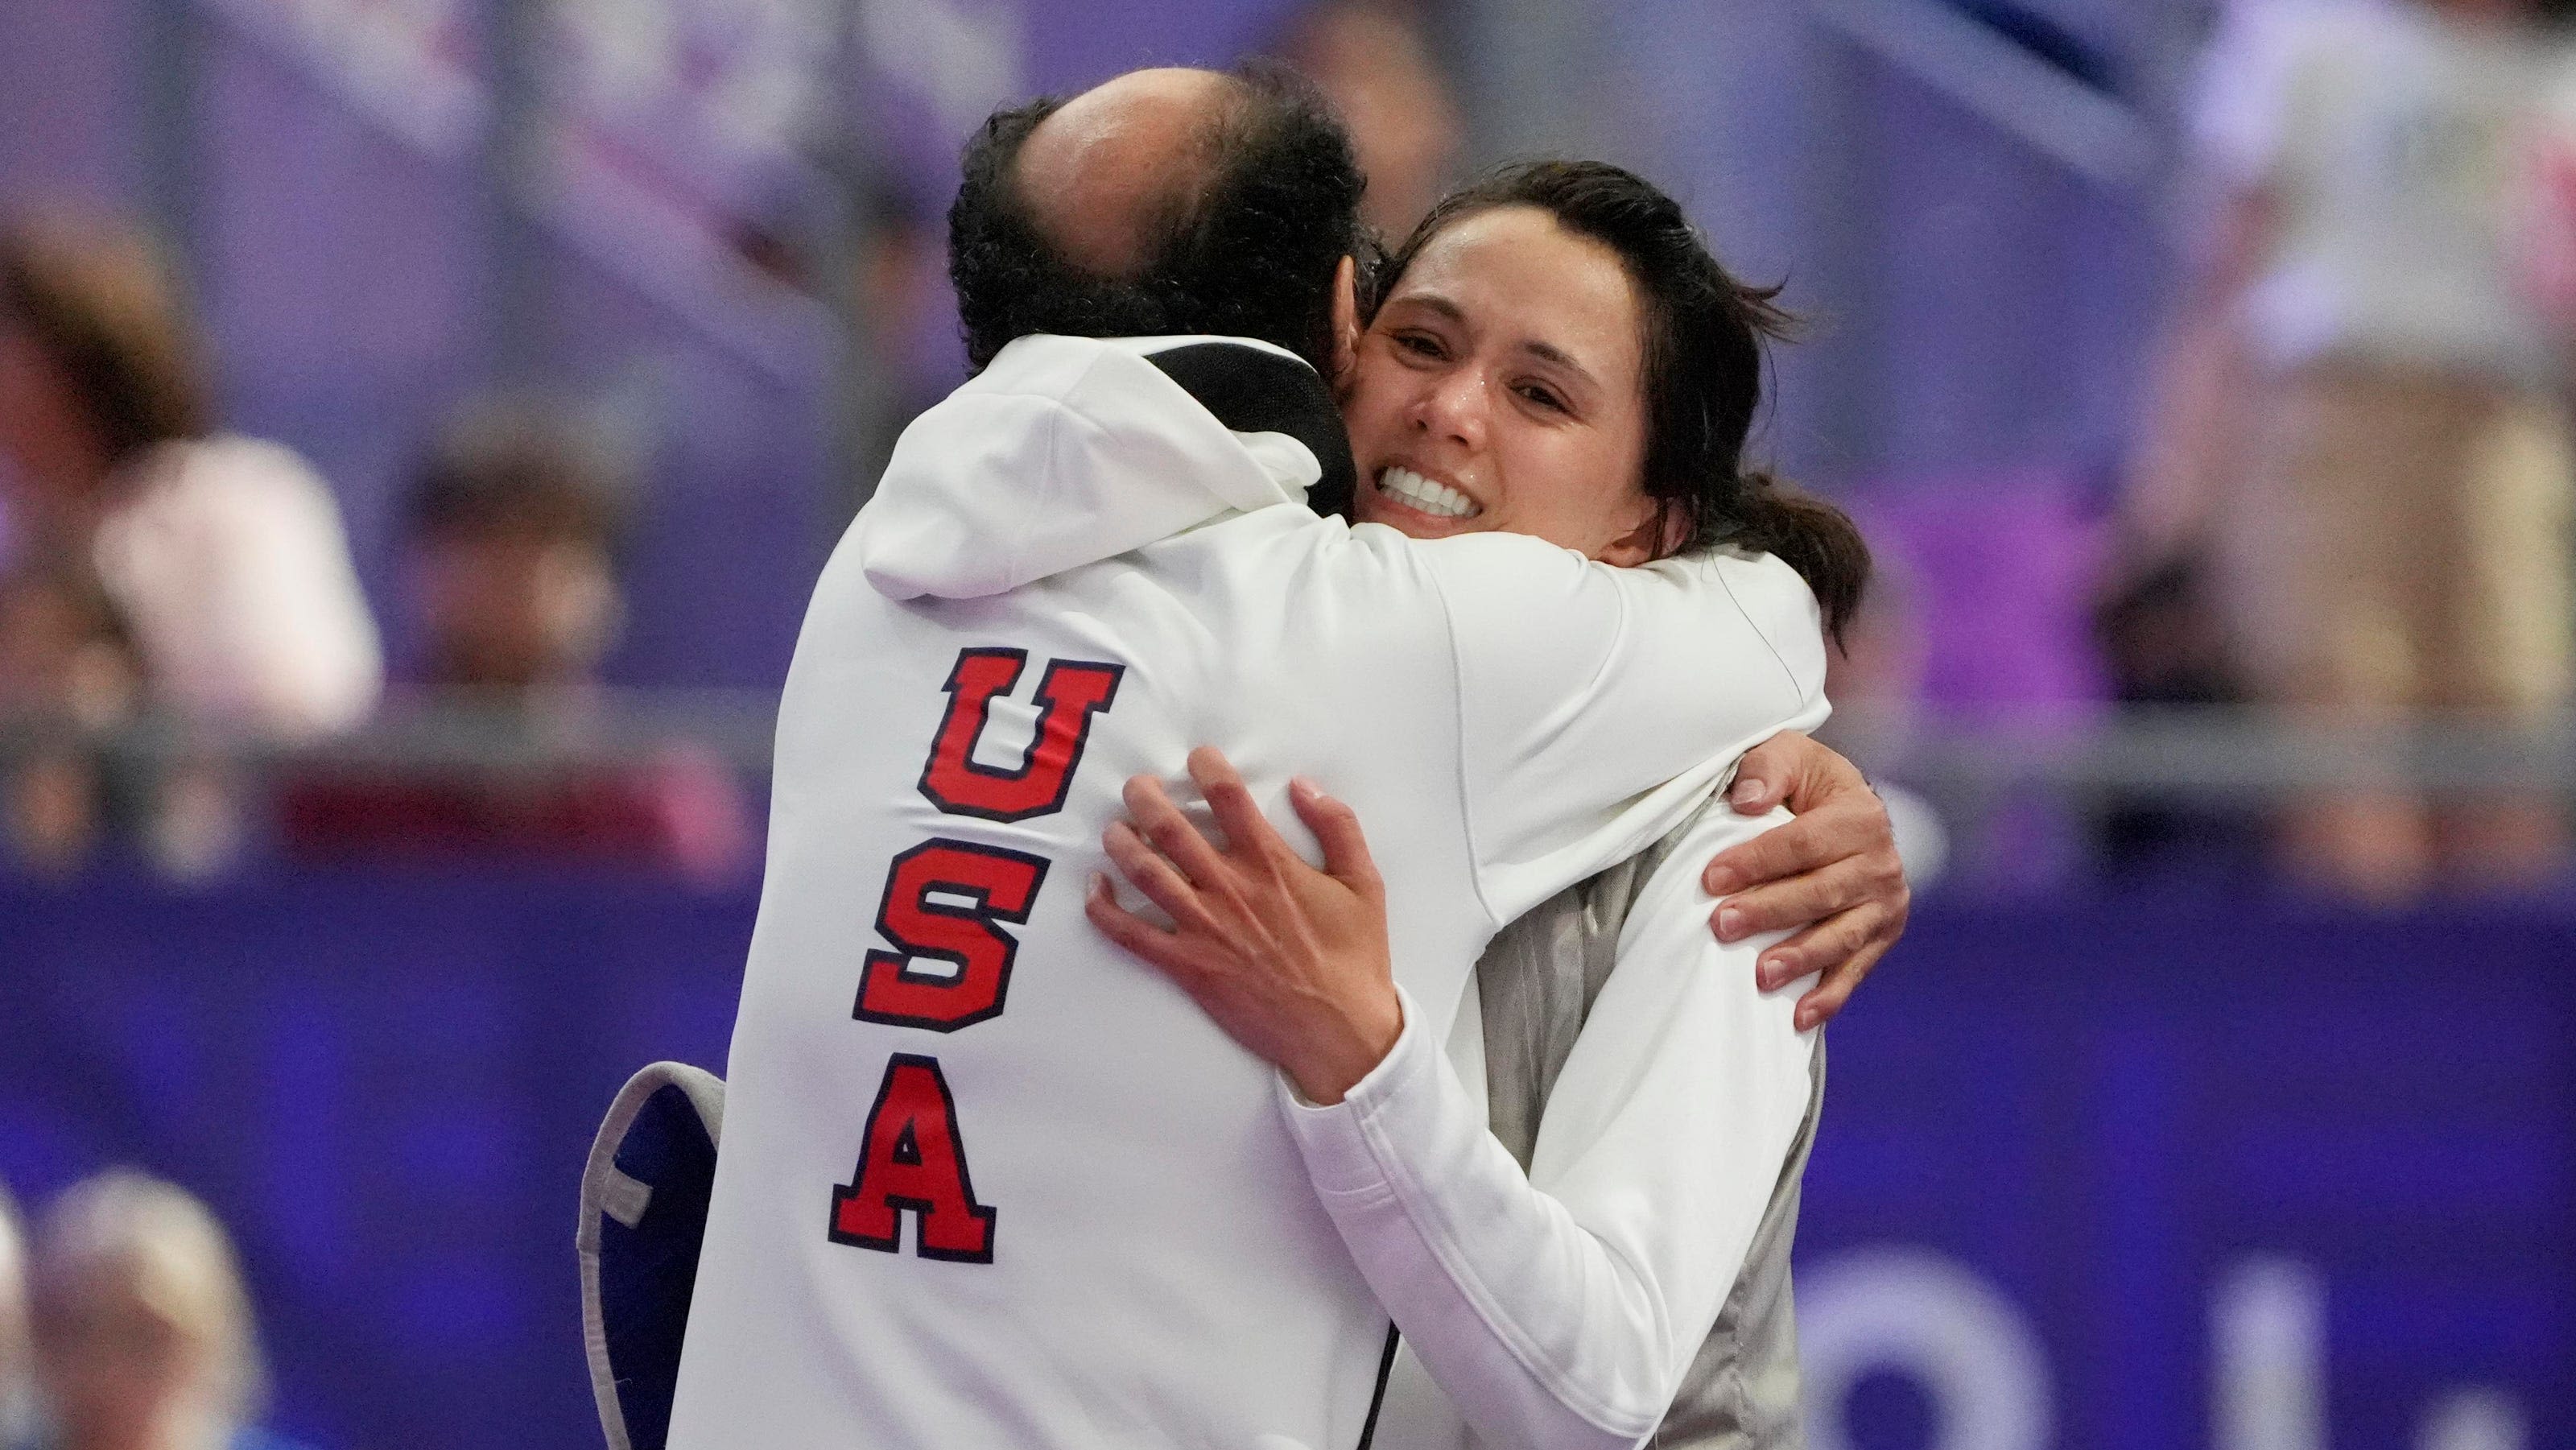 Notre Dame's Lee Kiefer wins all-American fencing final for gold medal in Paris Olympics